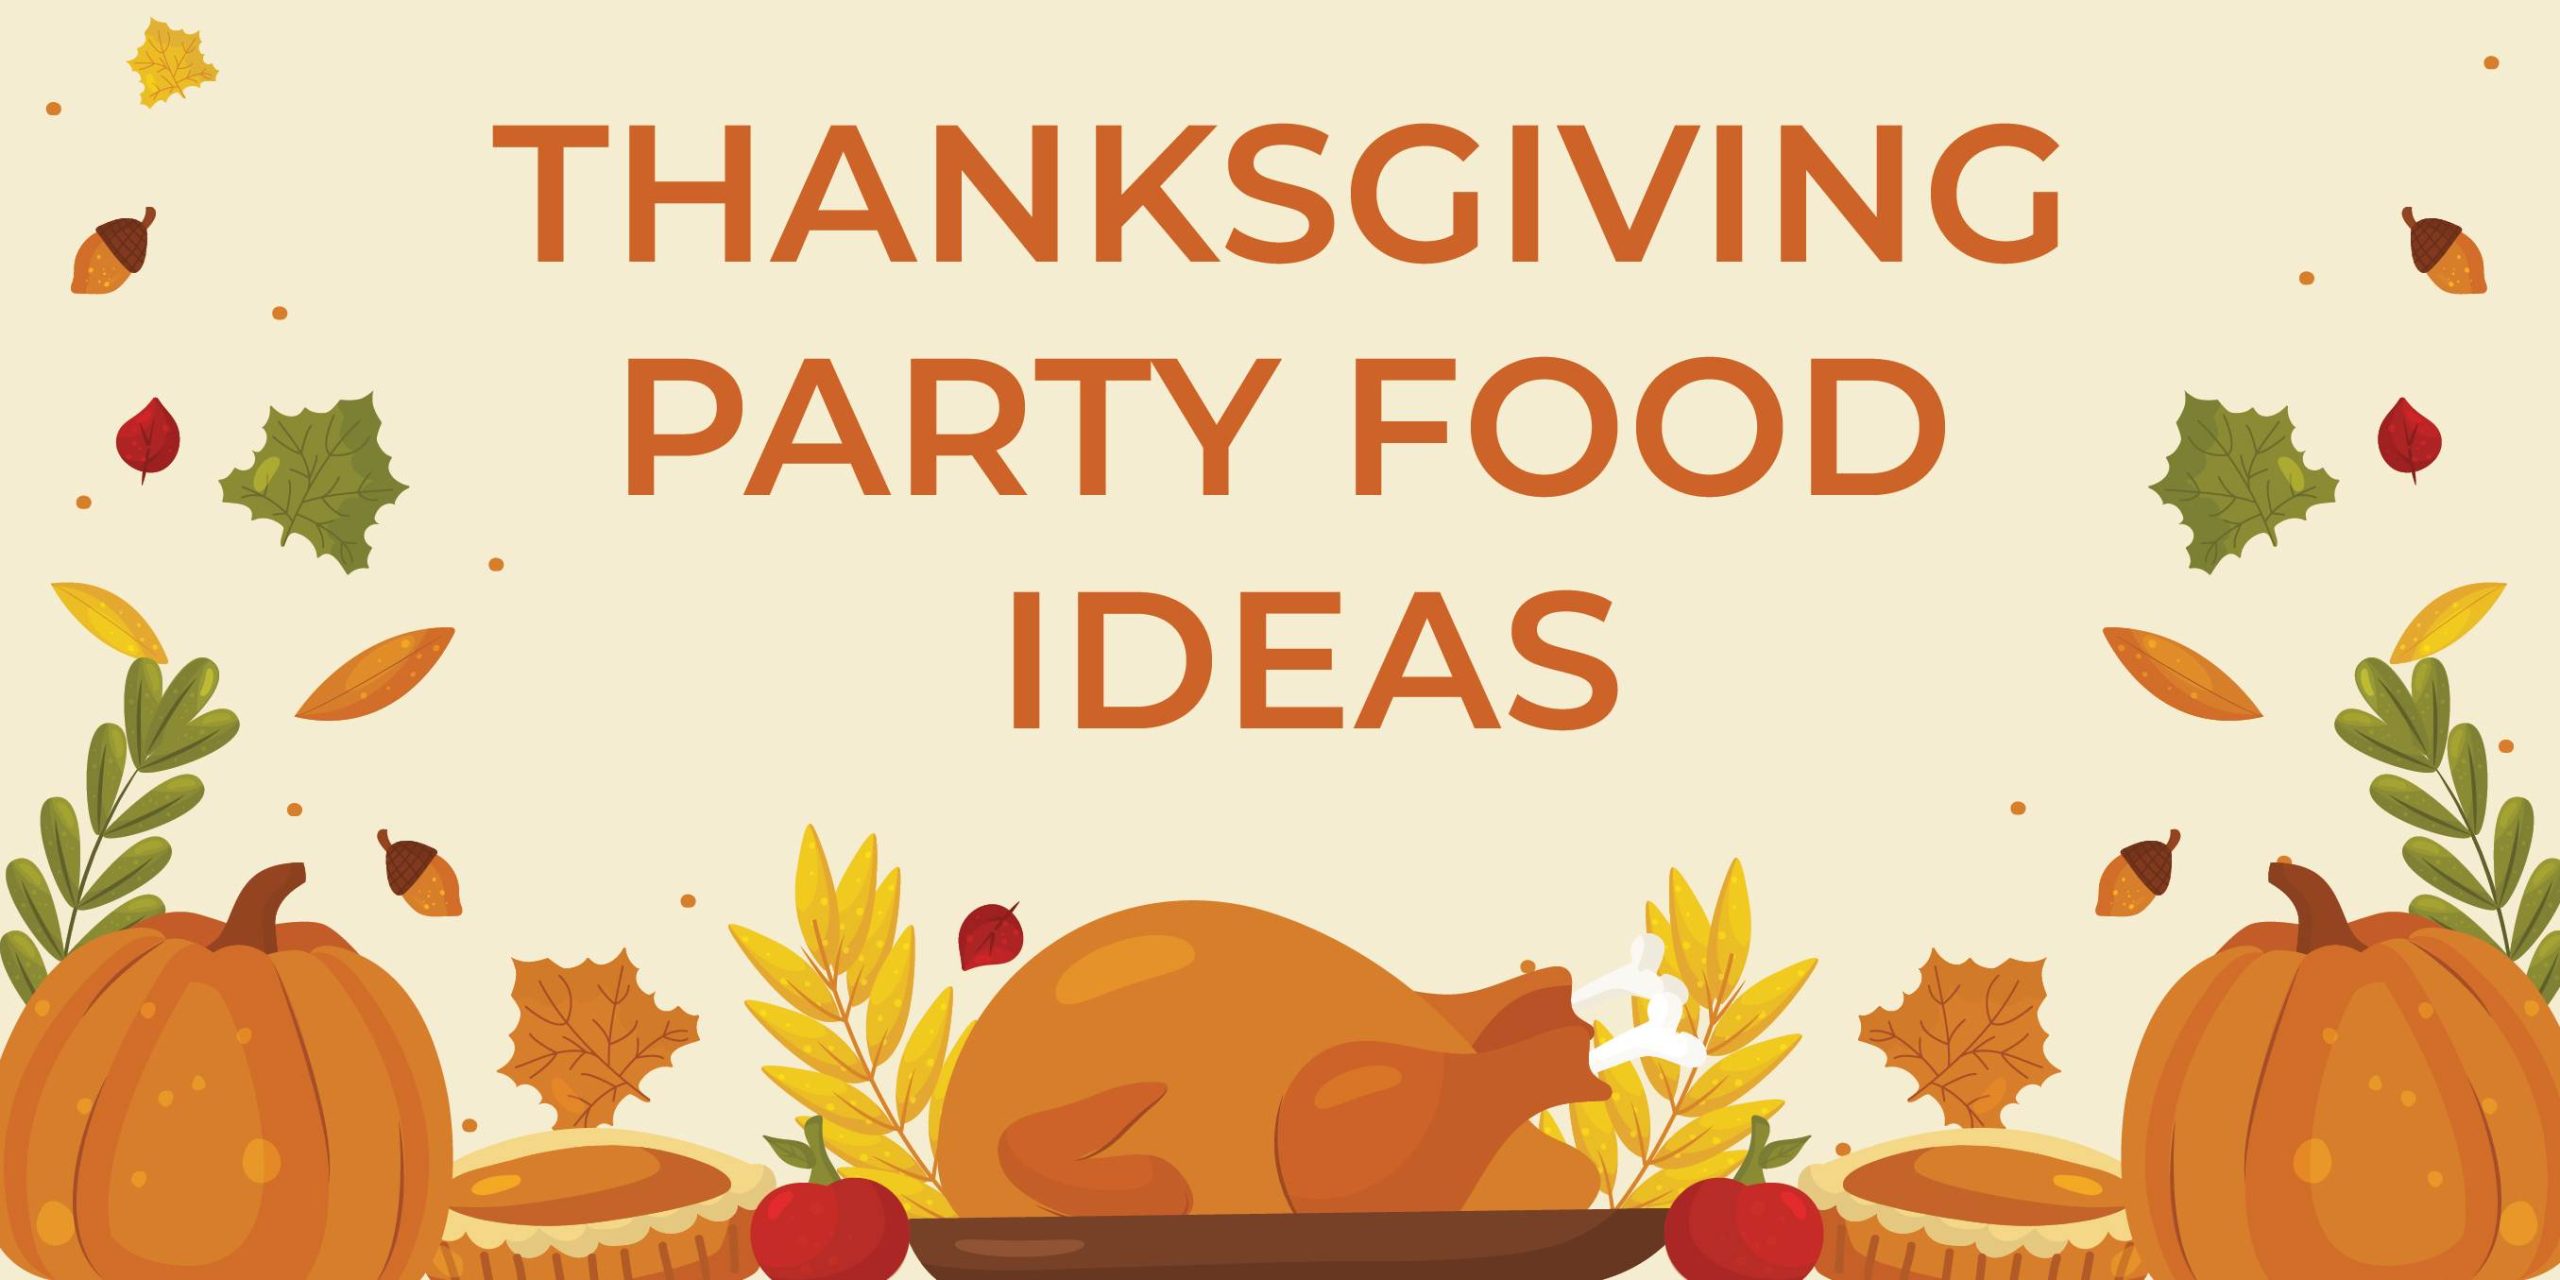 Thanksgiving Party Food Ideas